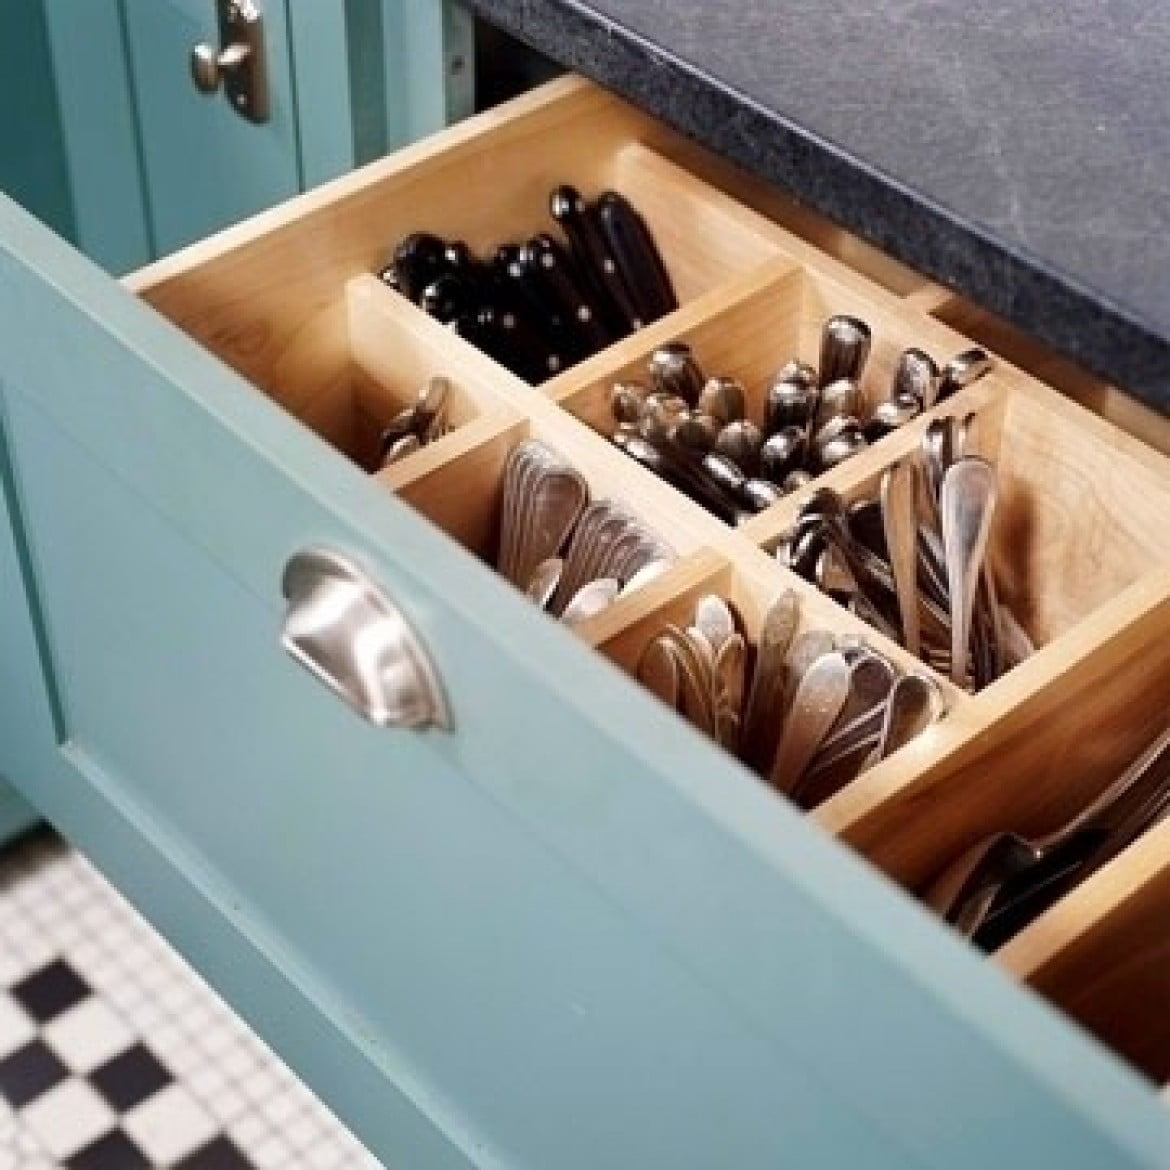 Keep Utensils in a Deep Drawer With Wooden, Vertical Slots